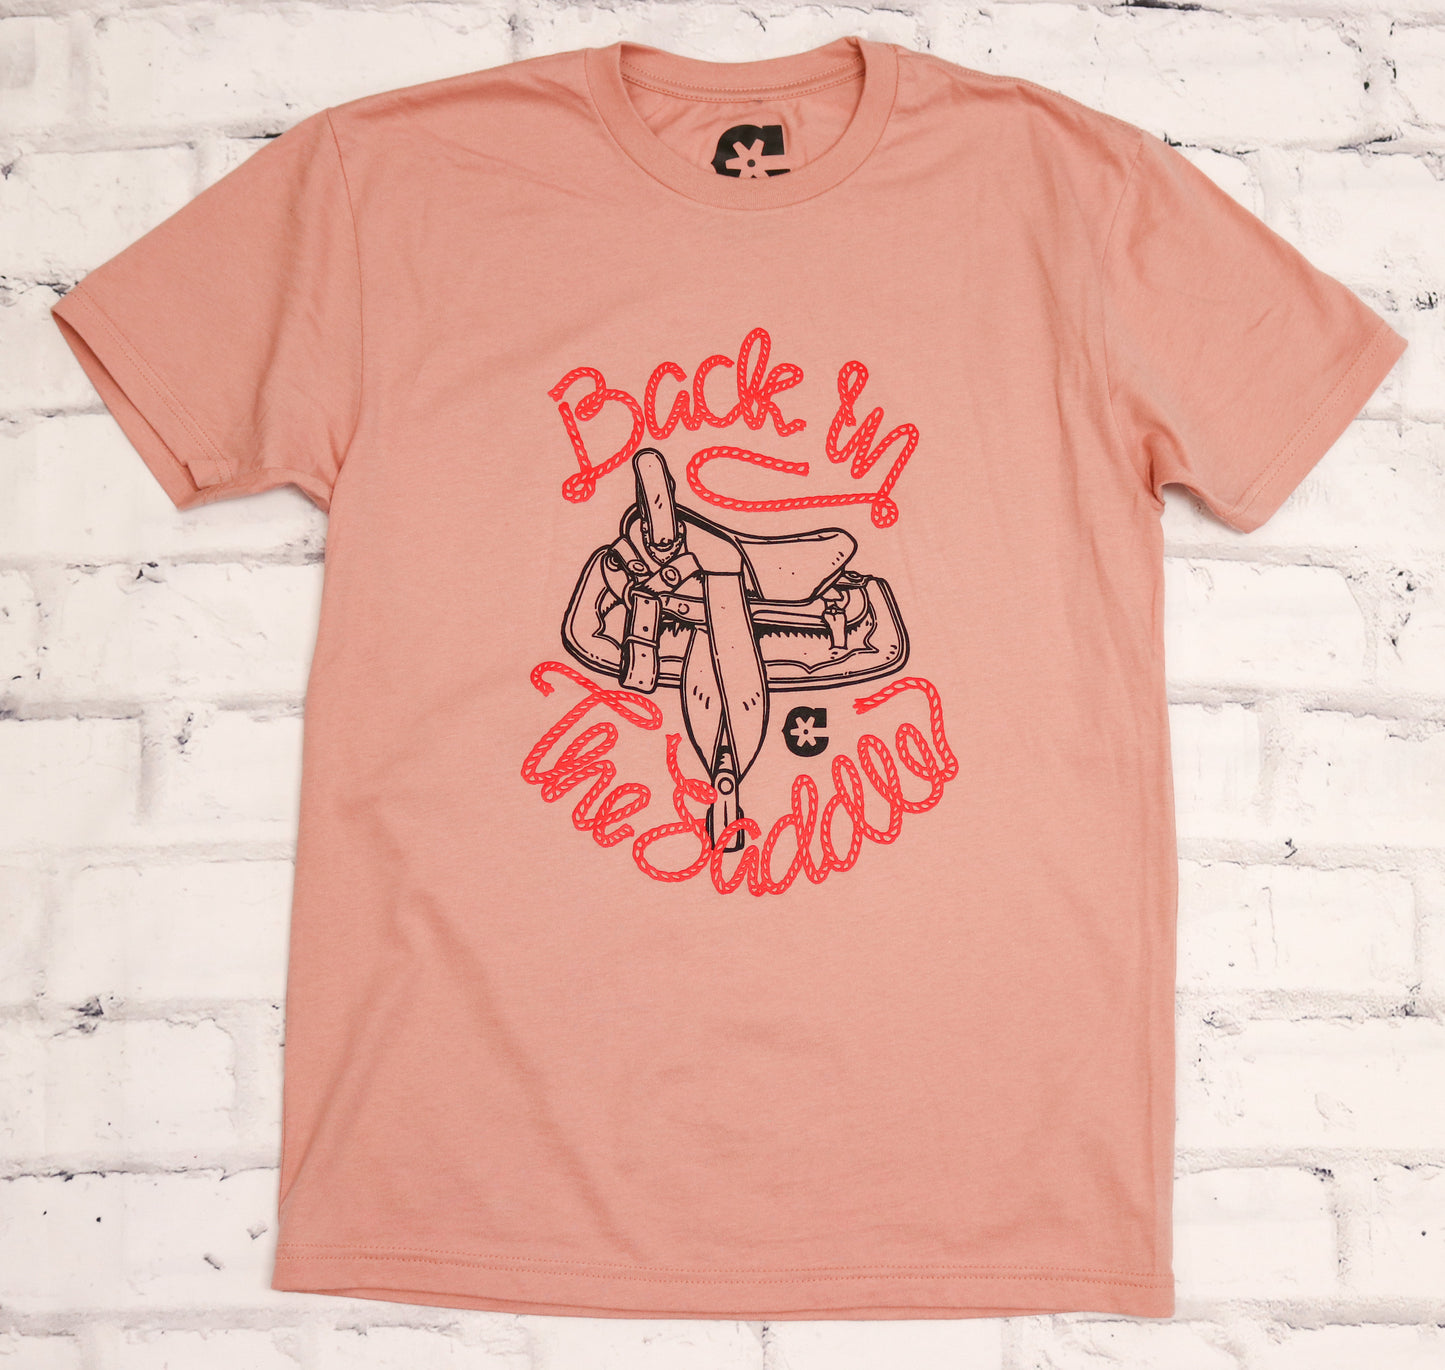 Desert Pink "Back In The Saddle" T-Shirt